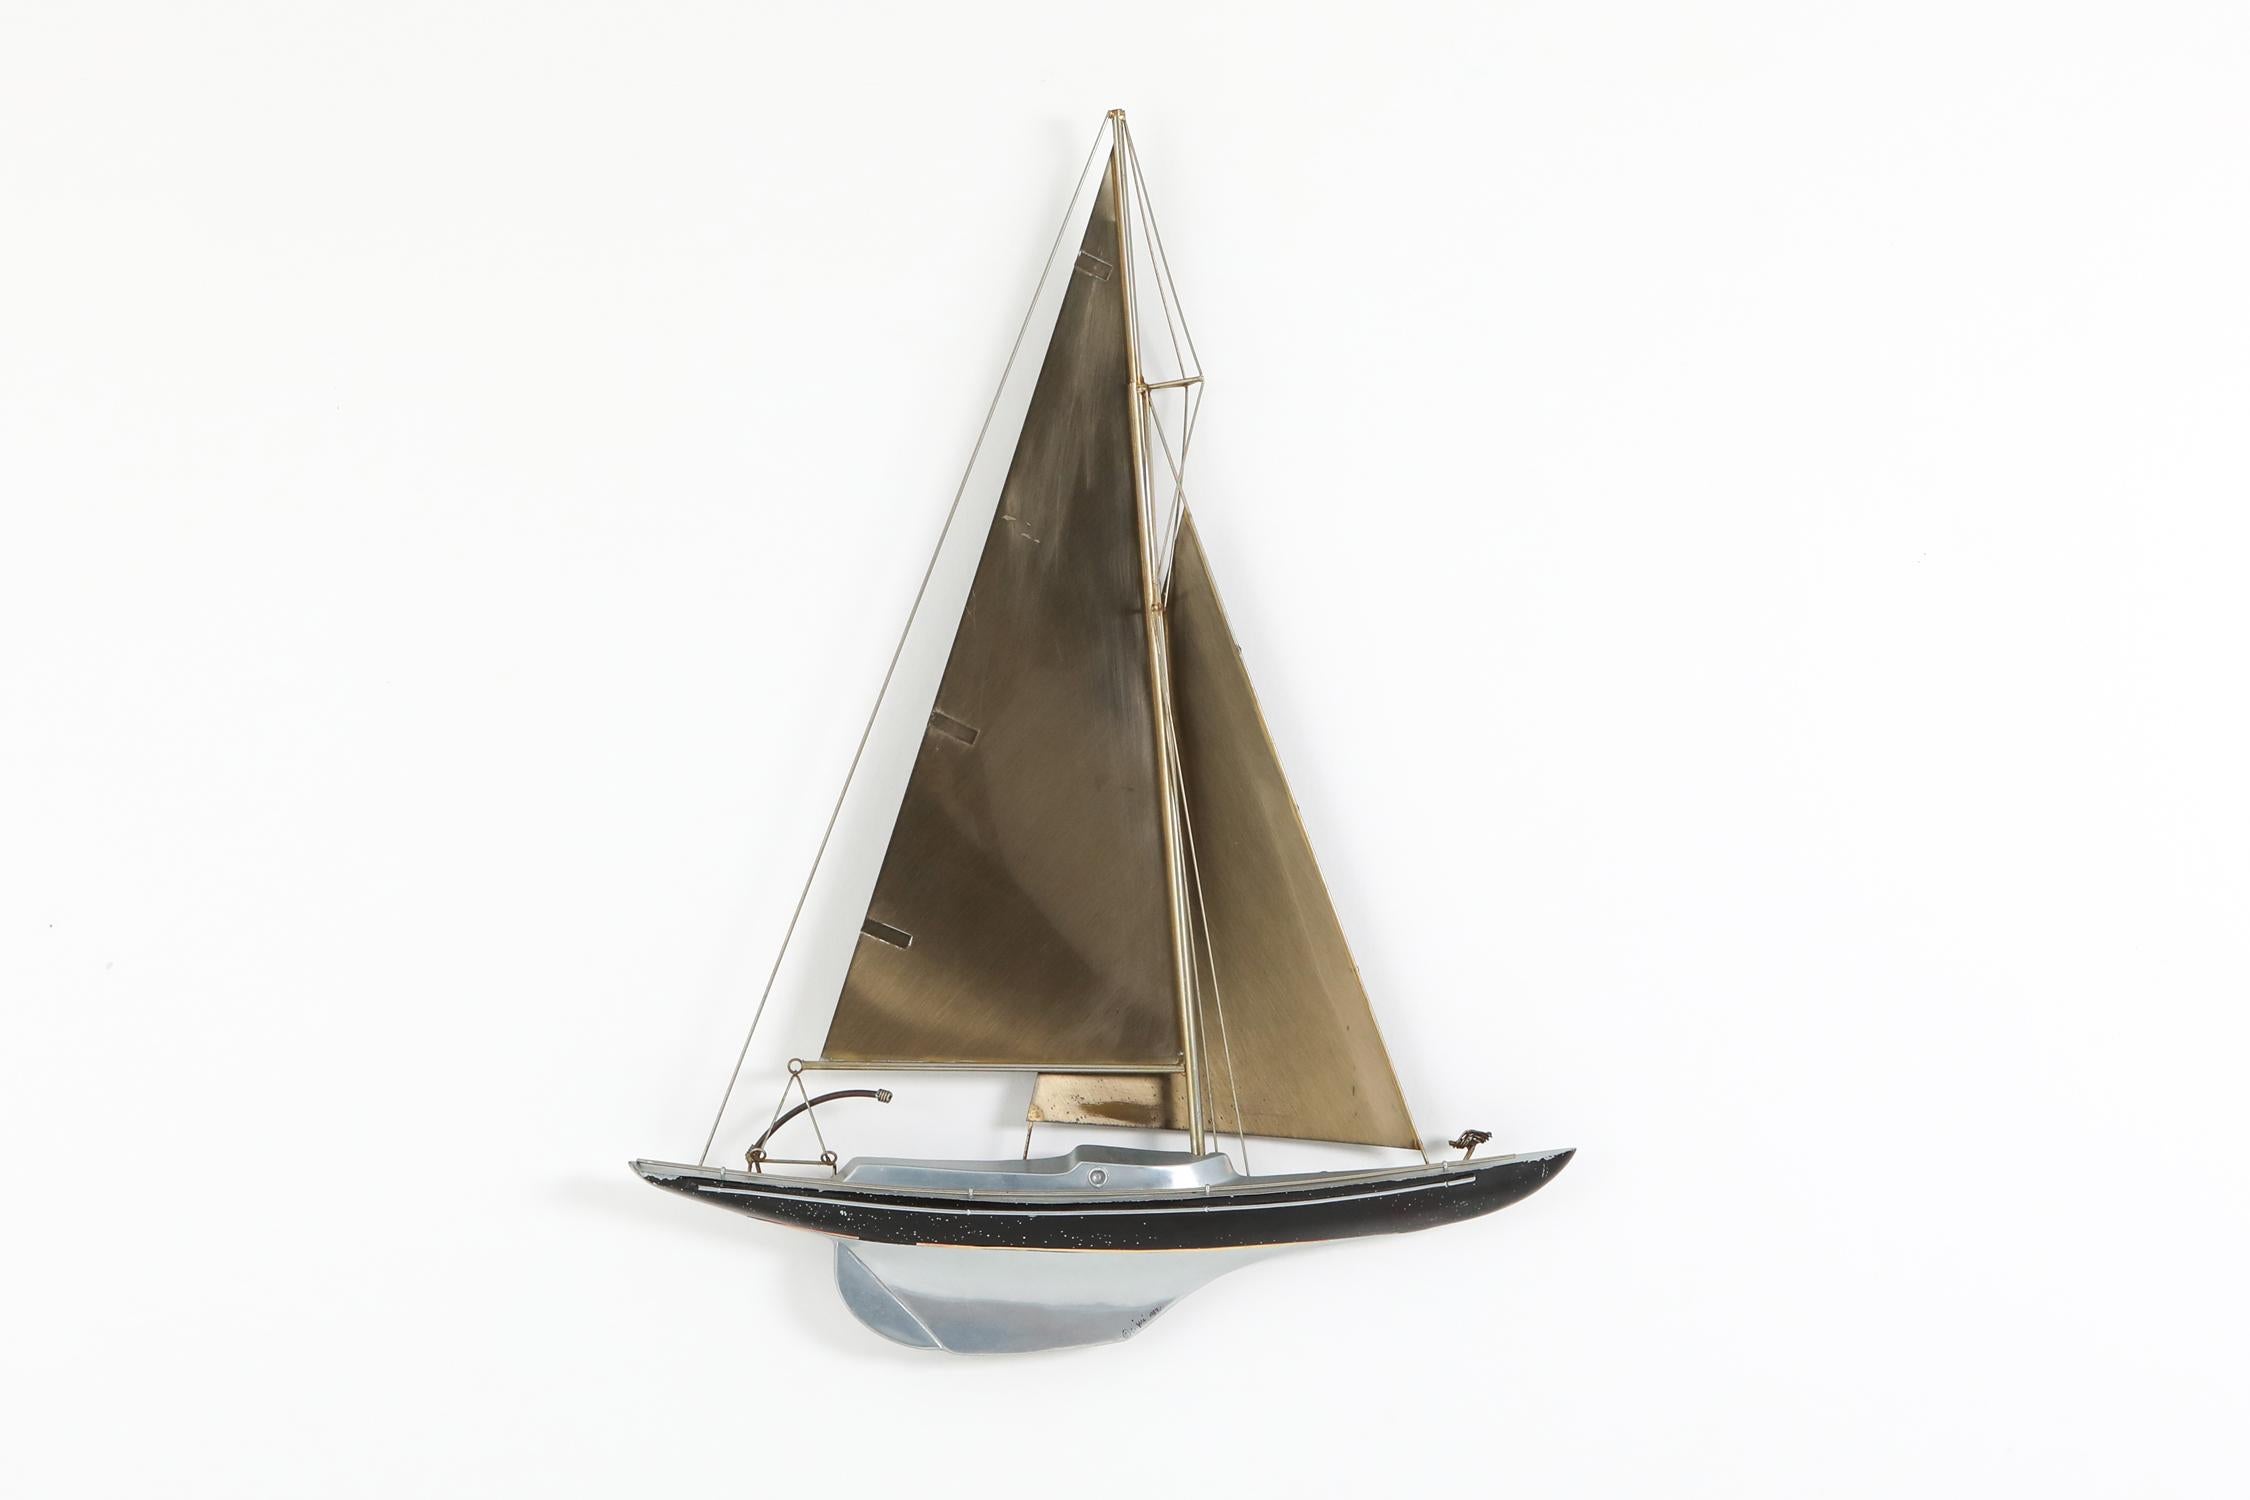 Mid-Century Modern brass and painted aluminum racing sail boat wall-mounted sculpture. Signed C. Jere 1995 and complete with authenticity papers.